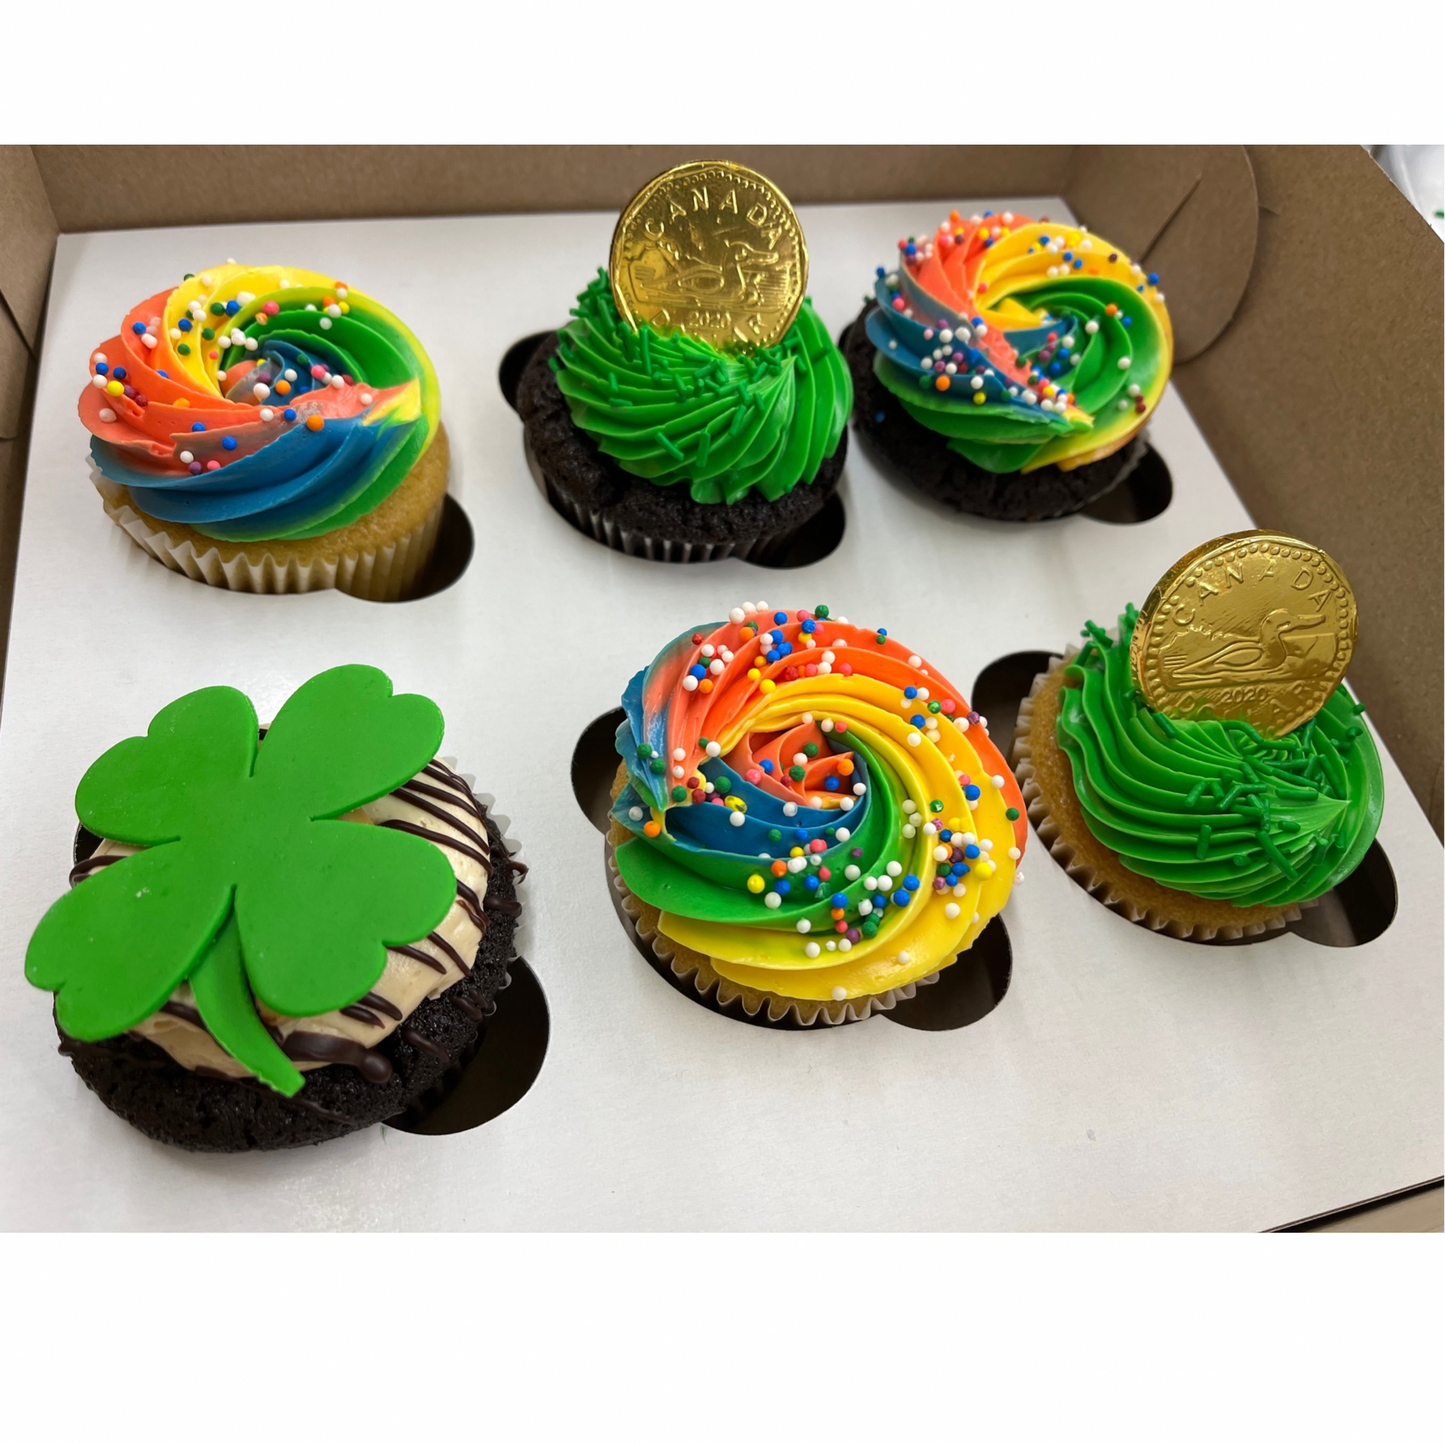 St Patrick’s Day Special Cupcakes